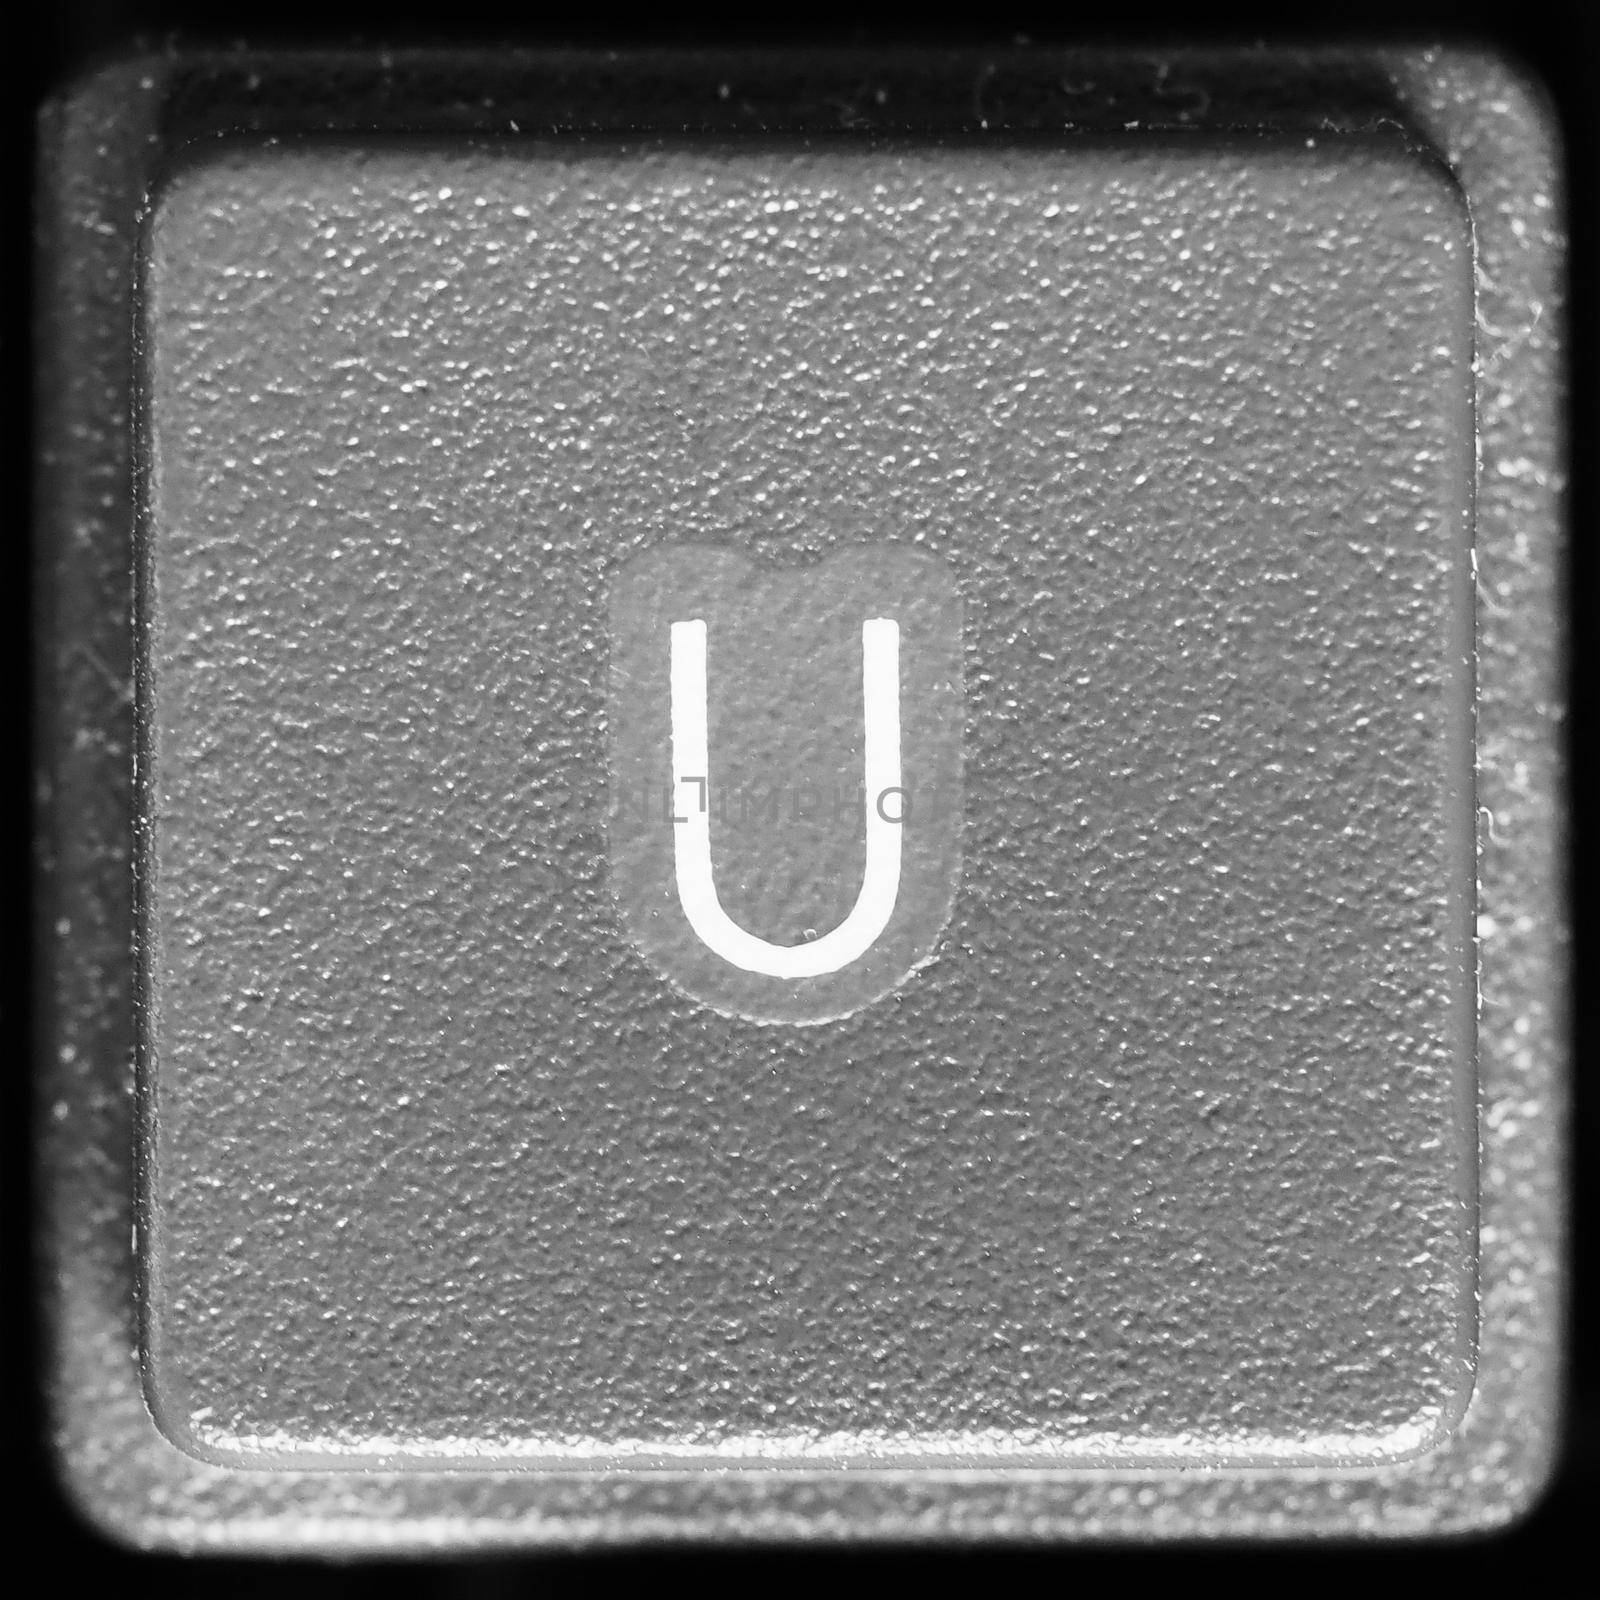 Letter U on computer keyboard by claudiodivizia